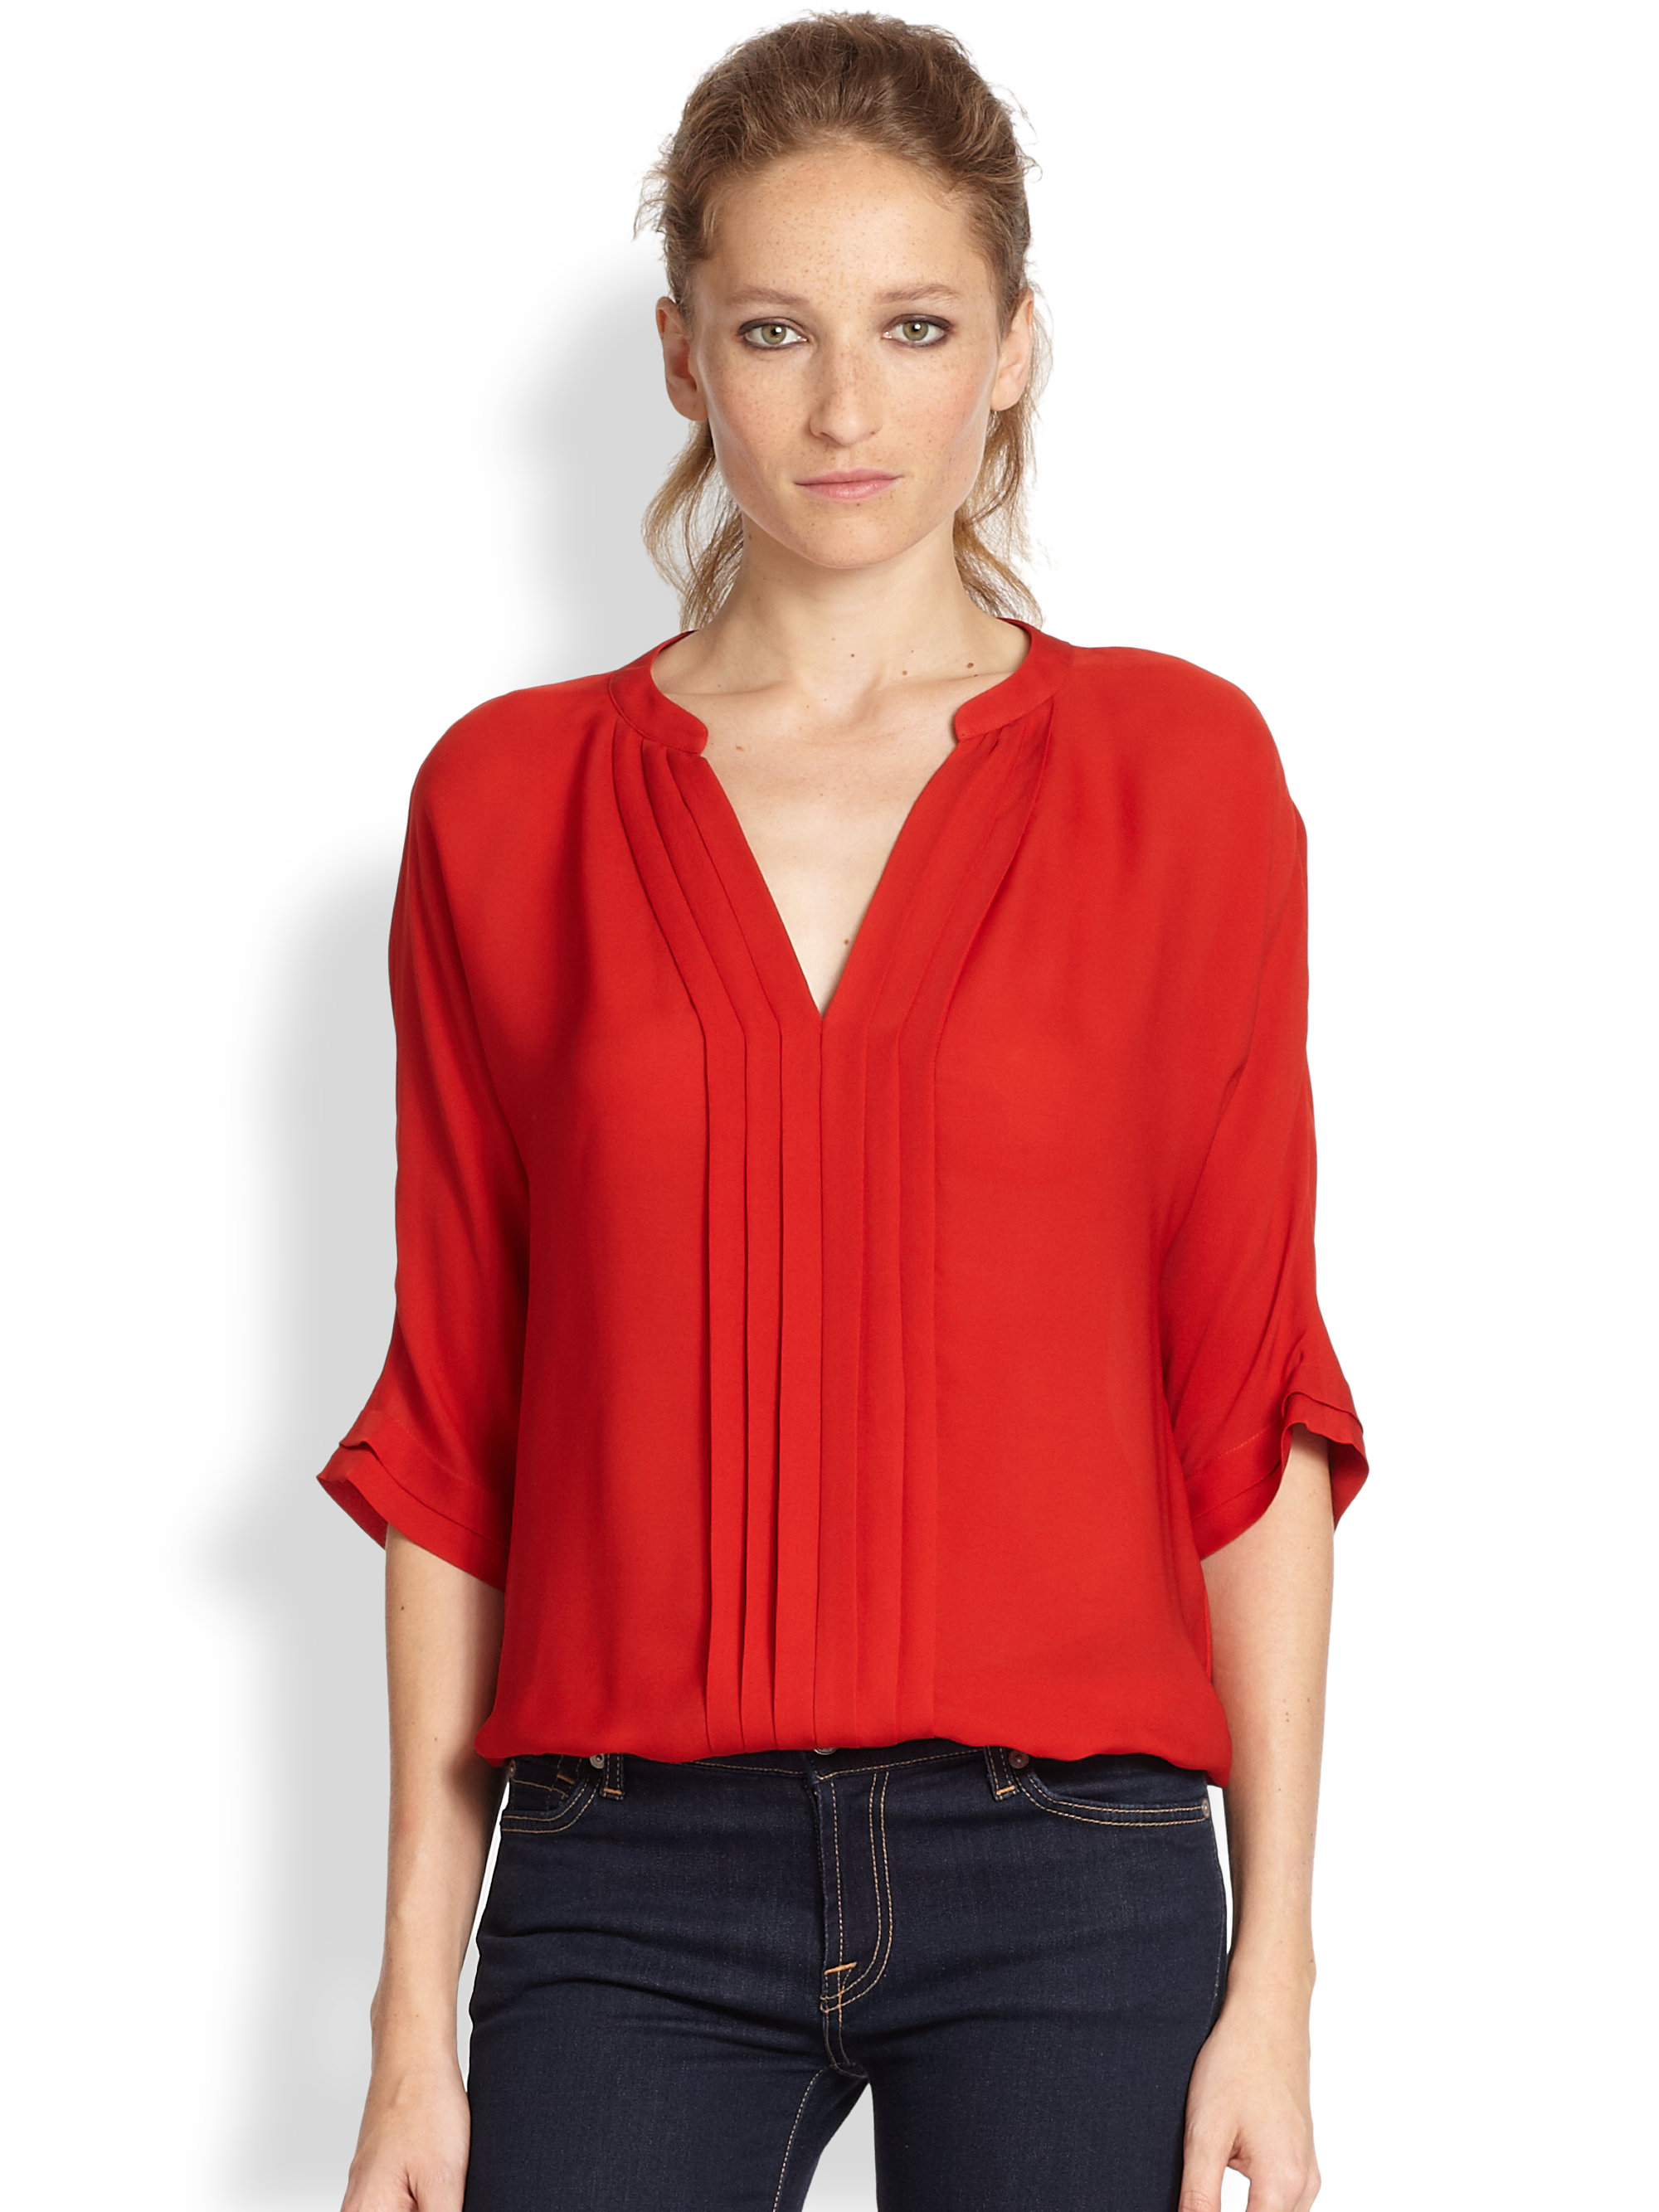 Lyst - Joie Pleated Silk Blouse in Red